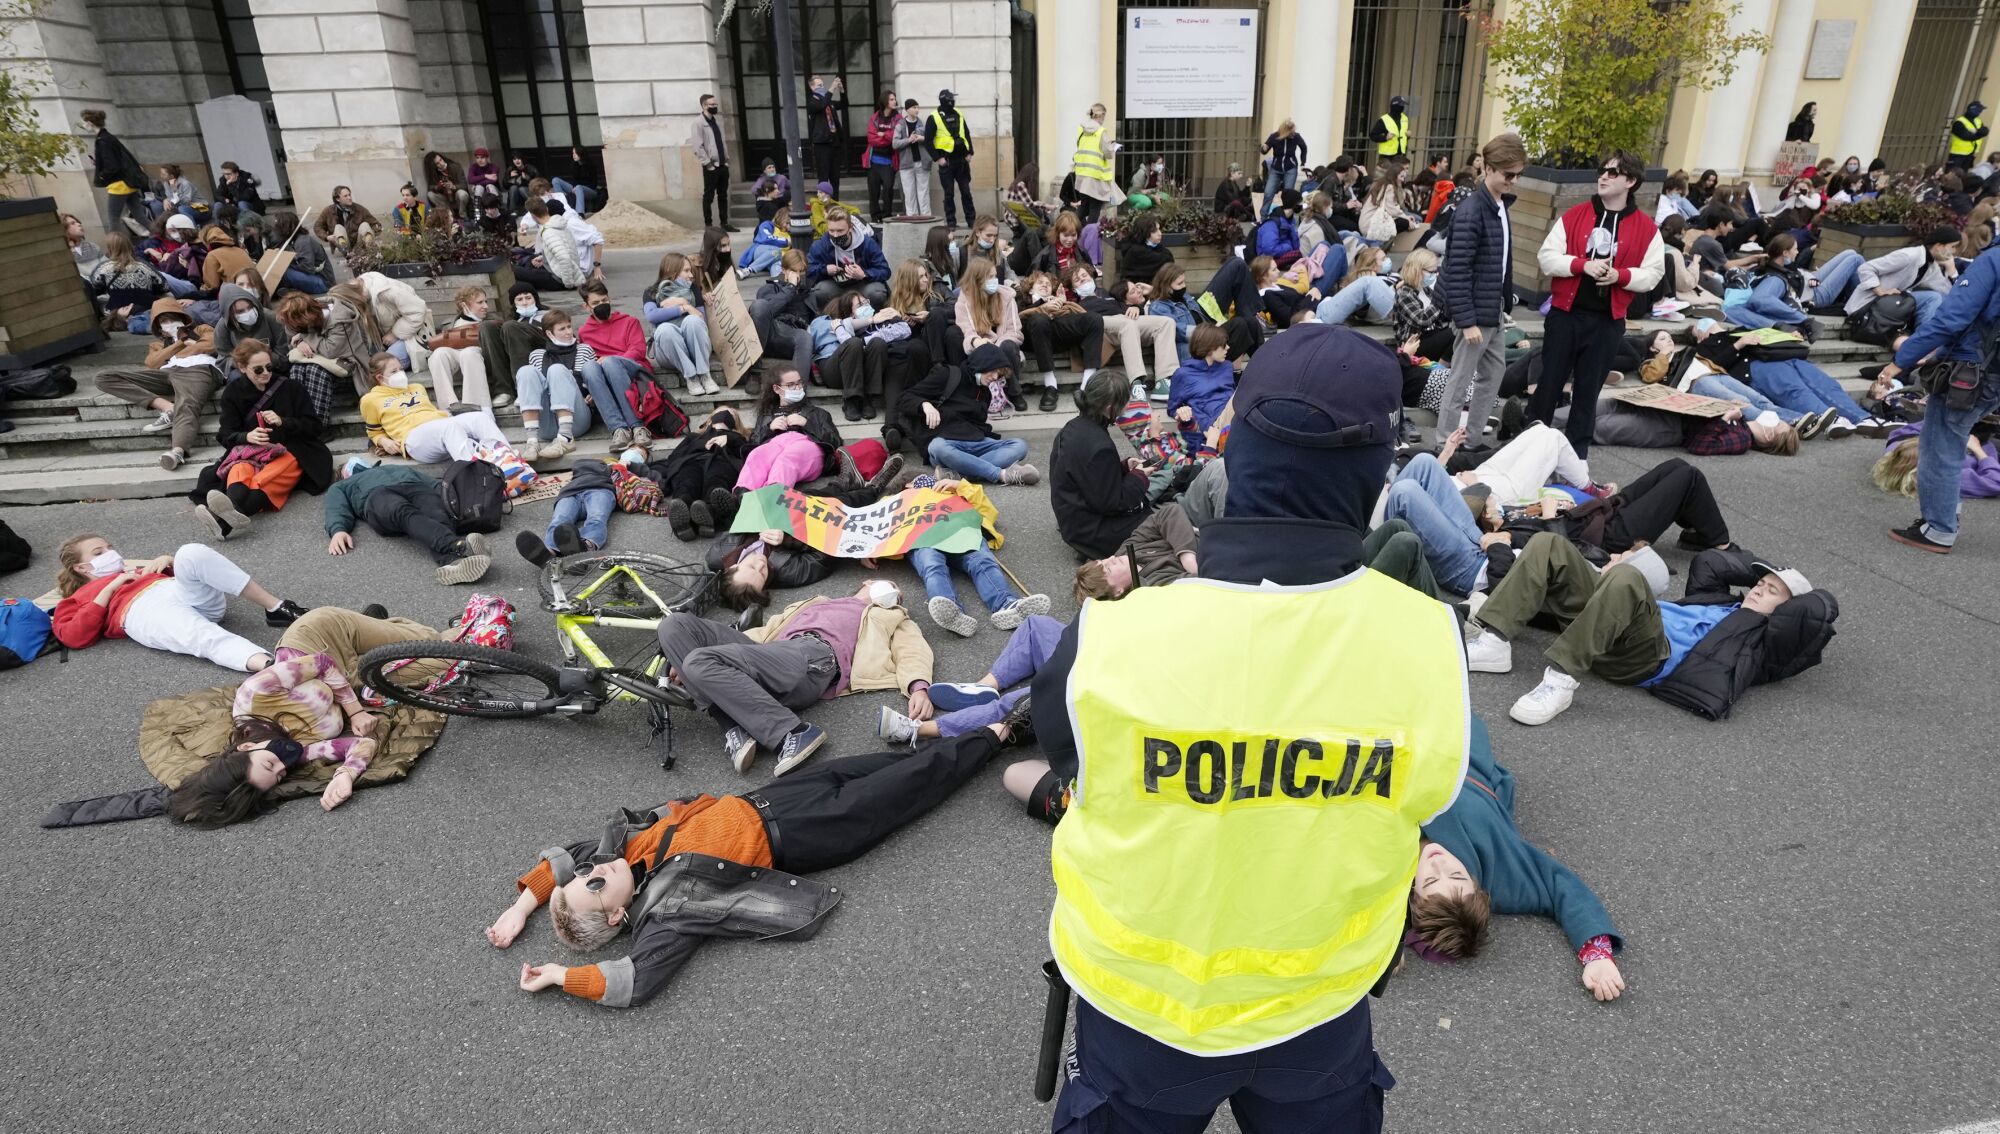 Activists lie in a street. A police officer looks on.